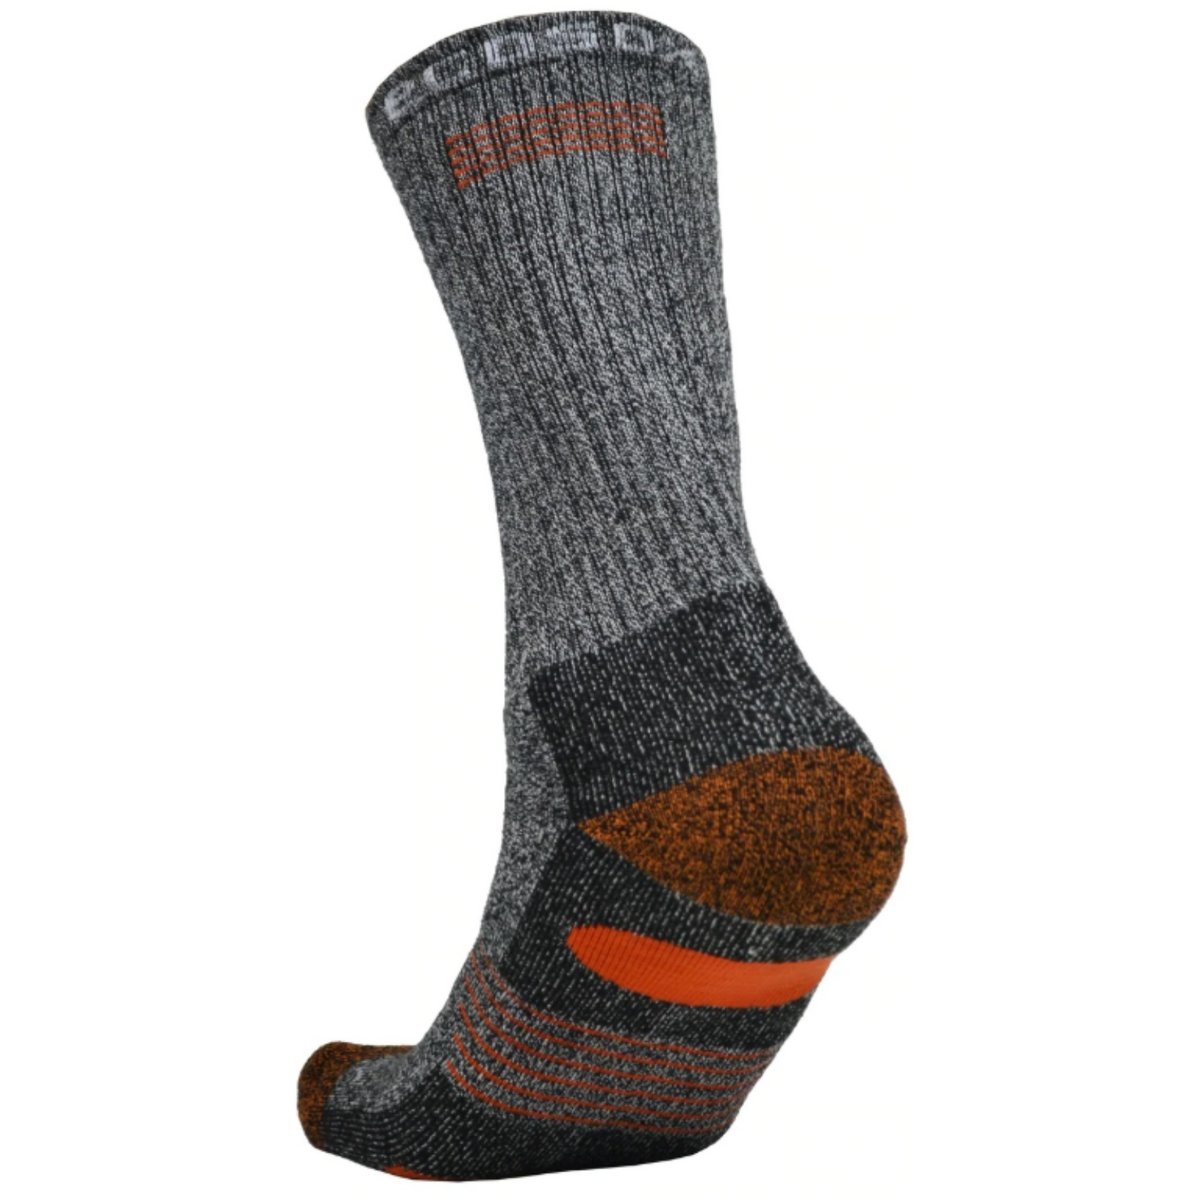 EcoSox Bamboo Hiking Full Cushion Crew height women&#39;s and men&#39;s socks in gray and orange on display foot